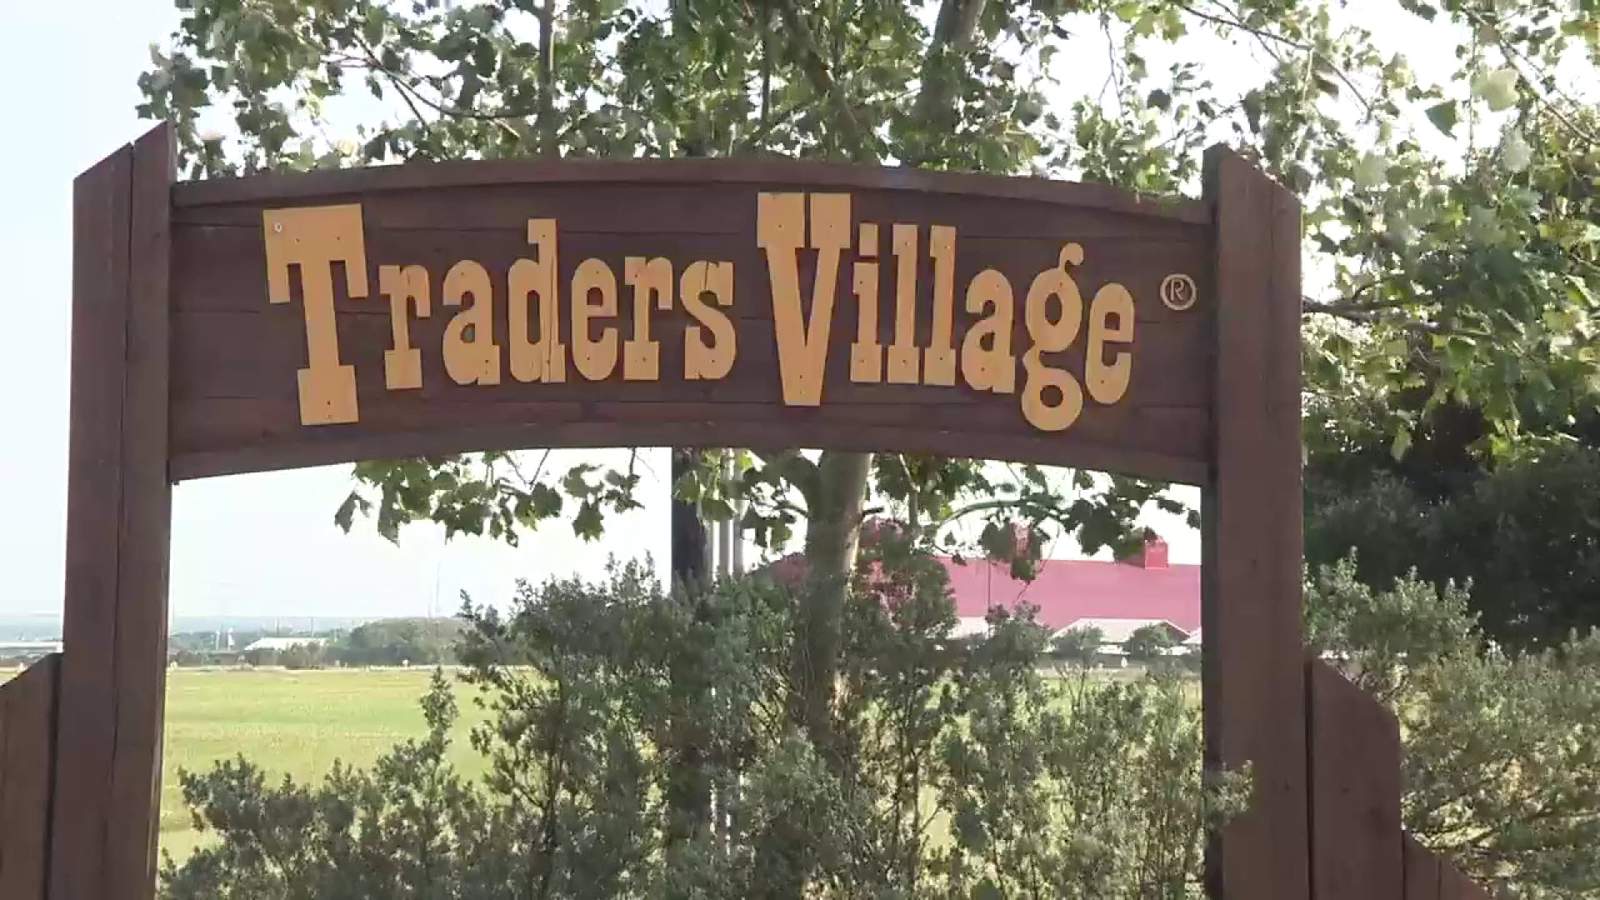 As Traders Village San Antonio remains closed, state says flea markets may reopen